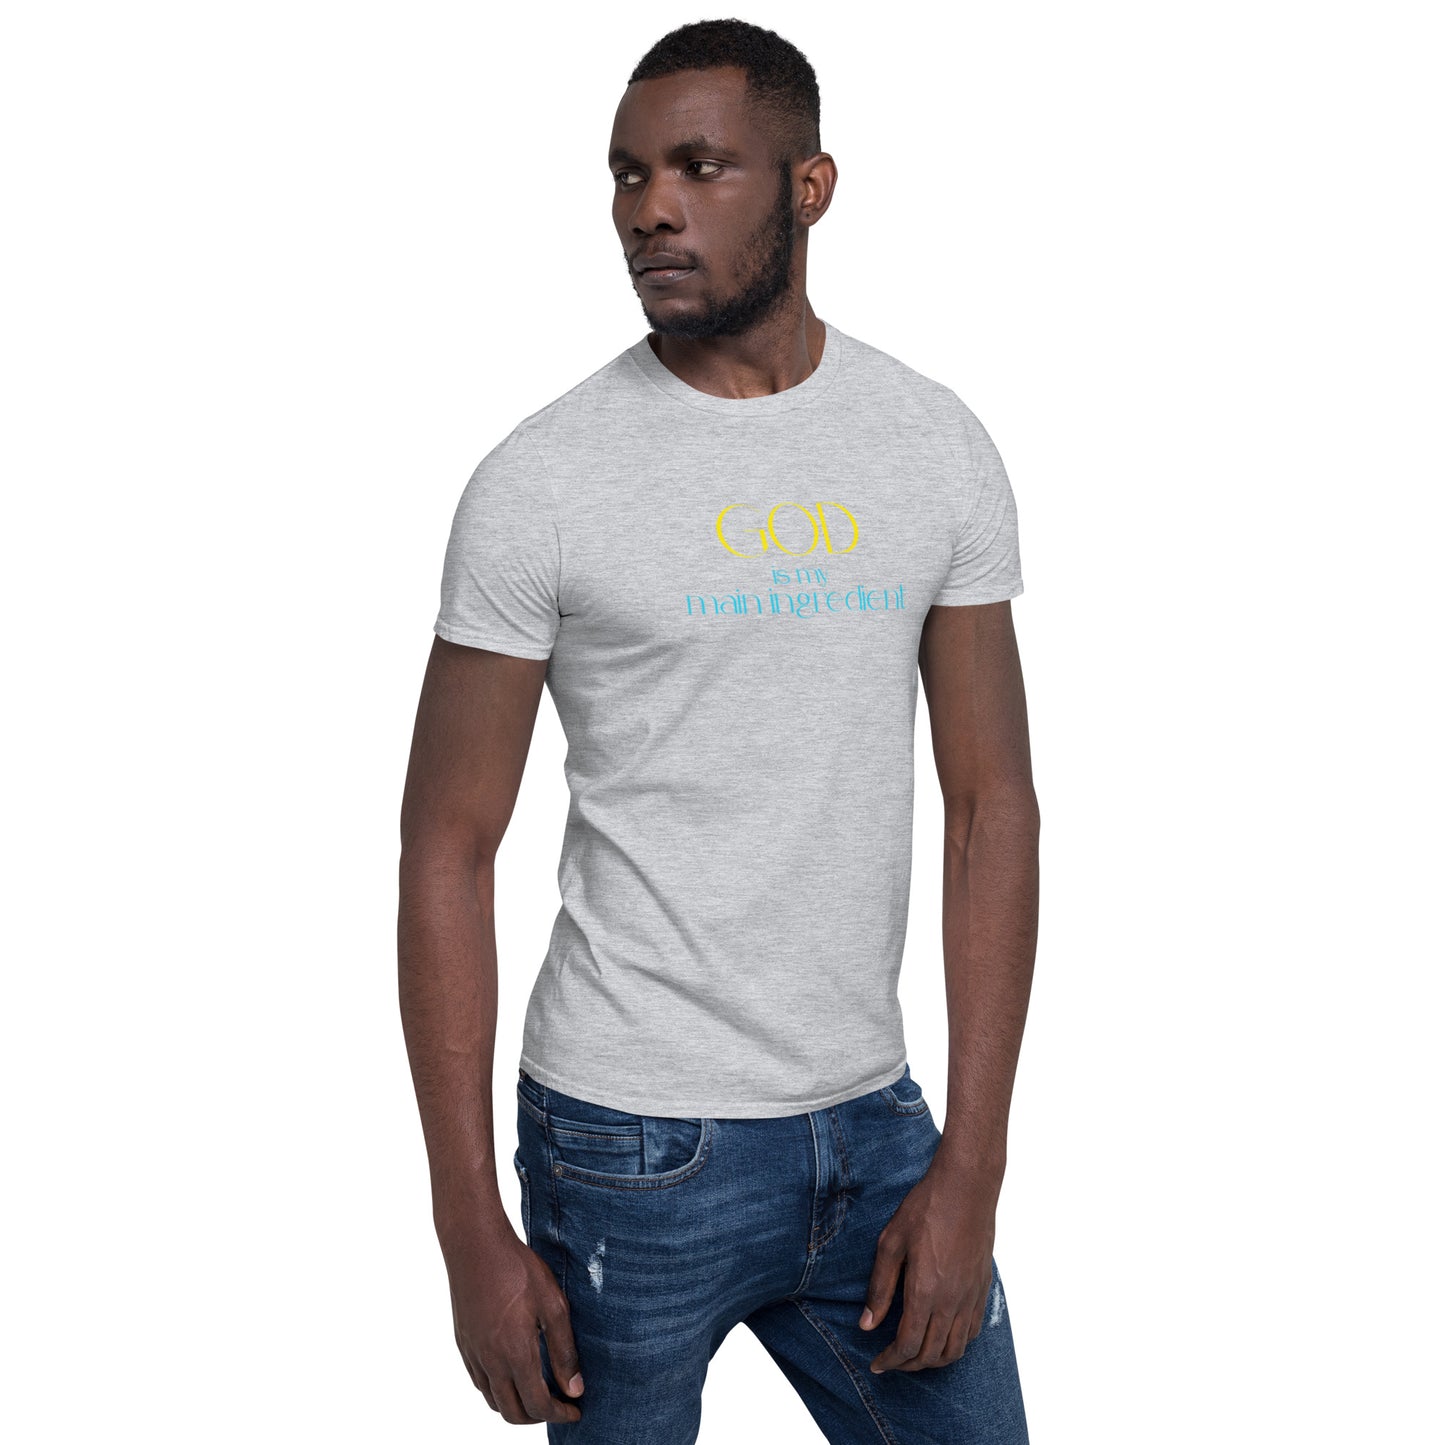 God Is The Main Ingredient Short-Sleeve T-Shirt